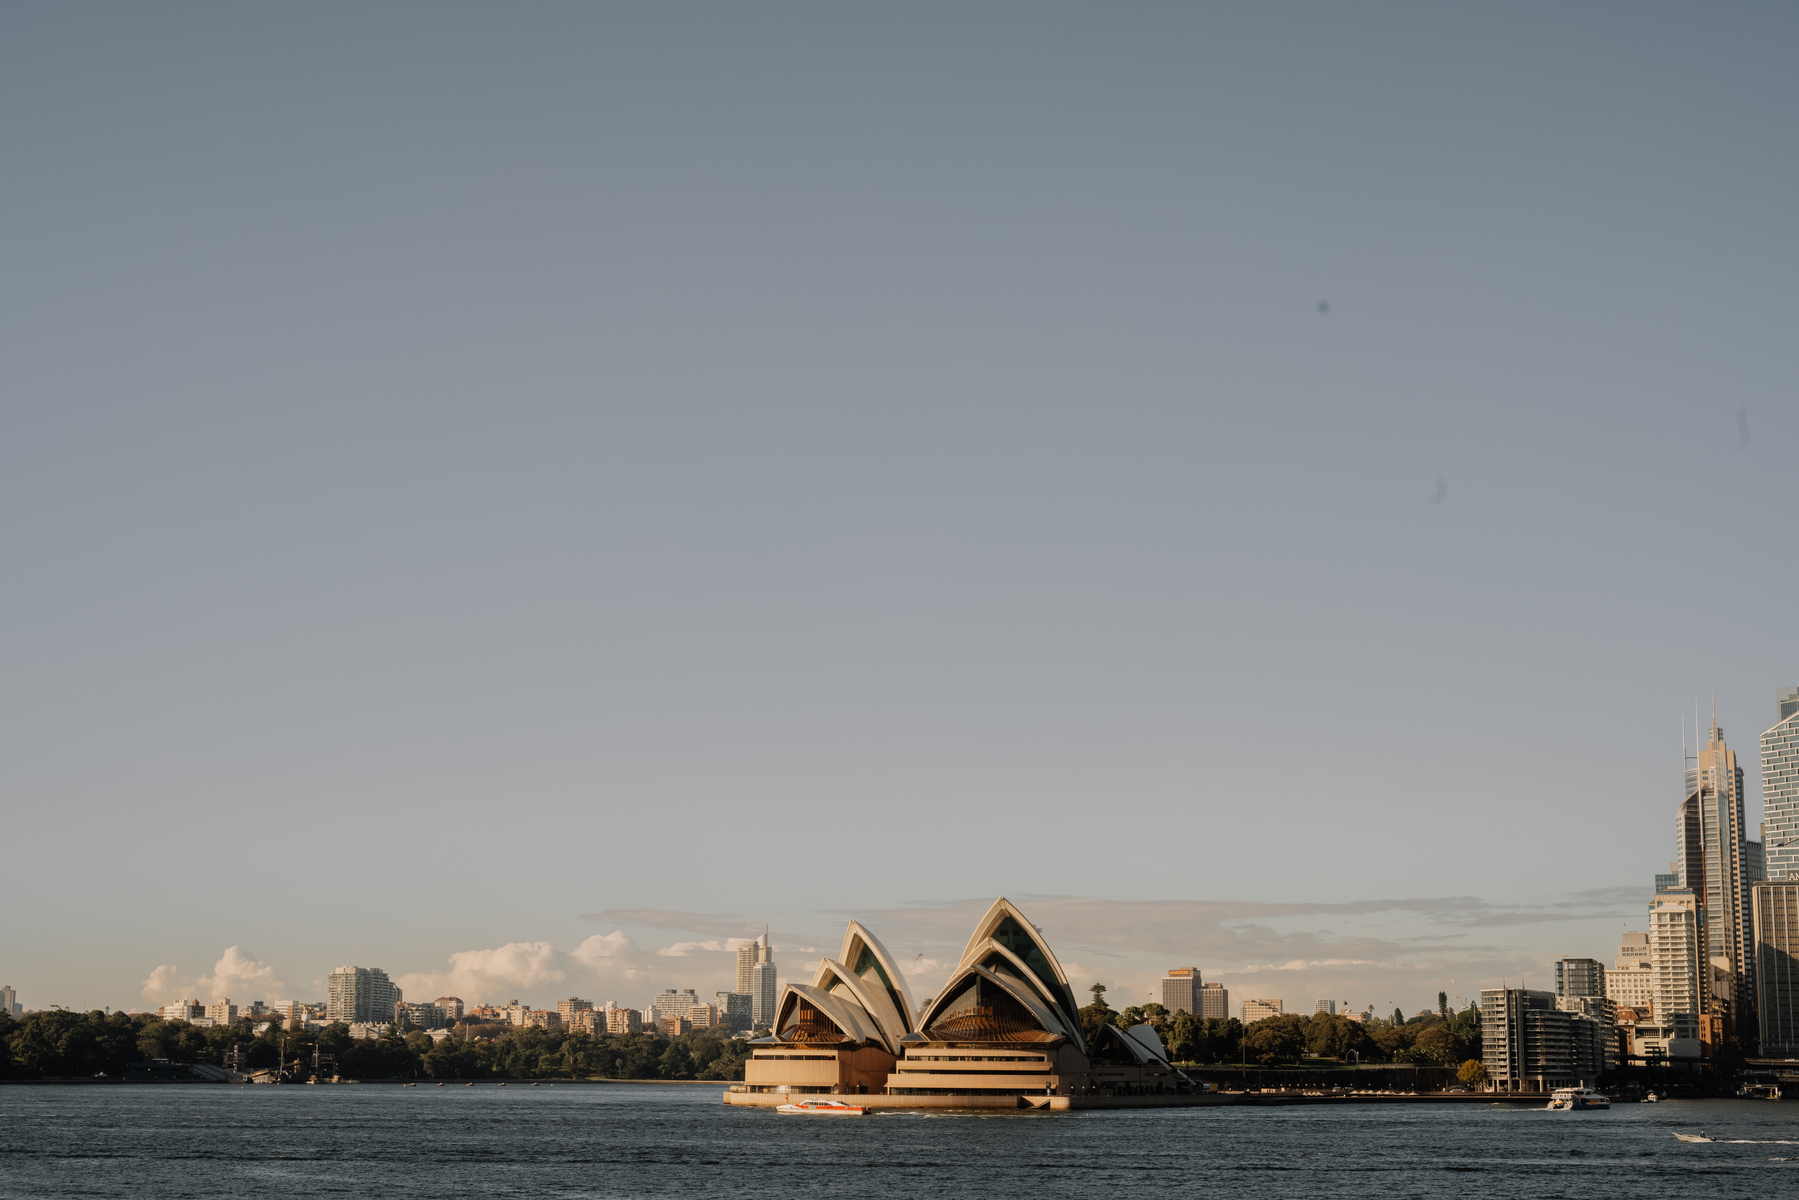 Sydney Opera House photographed by Josh Withers